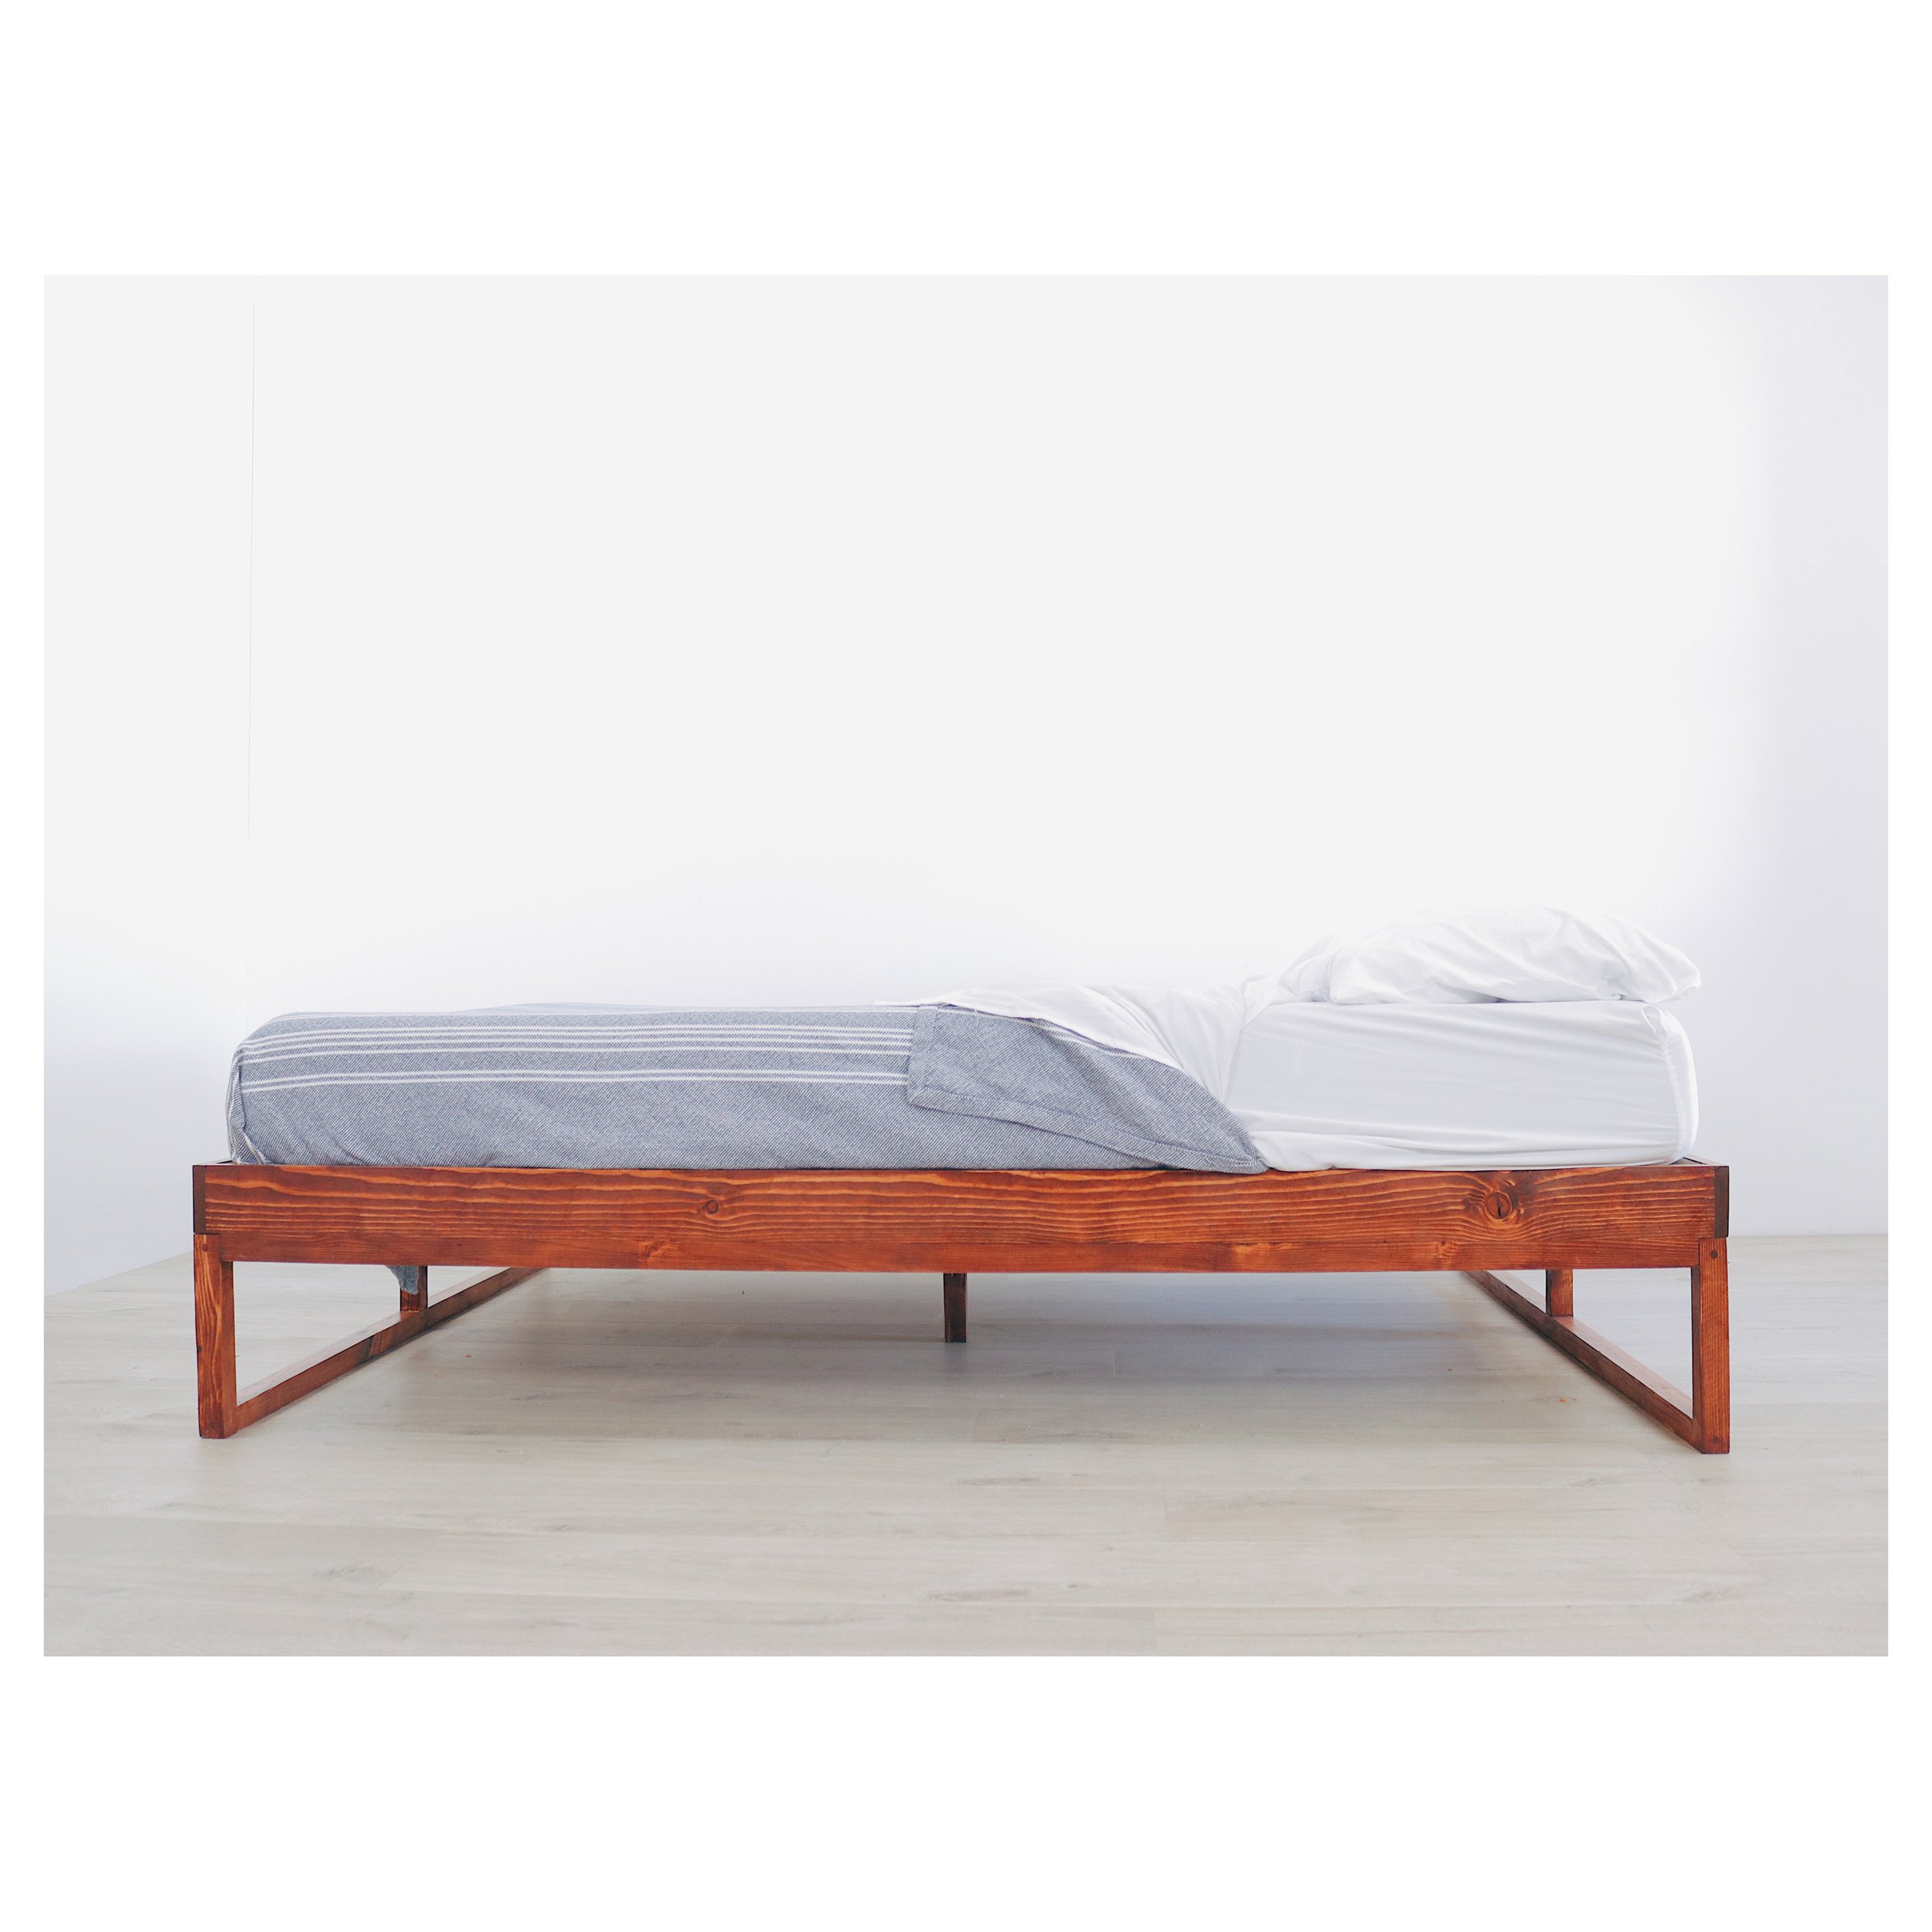  DIY Platform Bed by Mike Montgomery | Modern Builds 